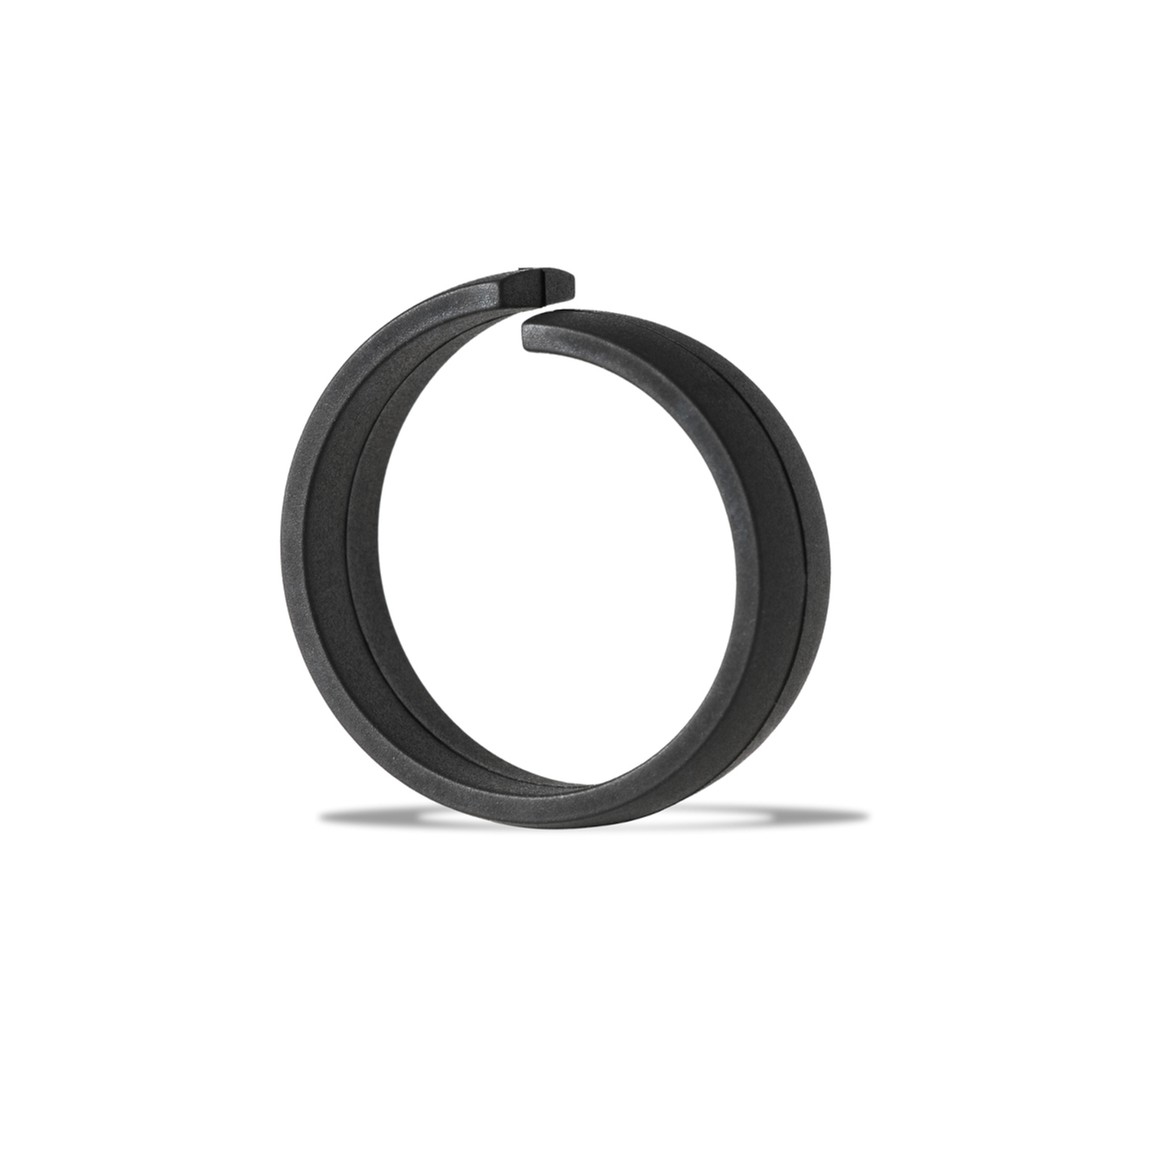 Rubber spacer for Kiox 300 display support 31,8mm